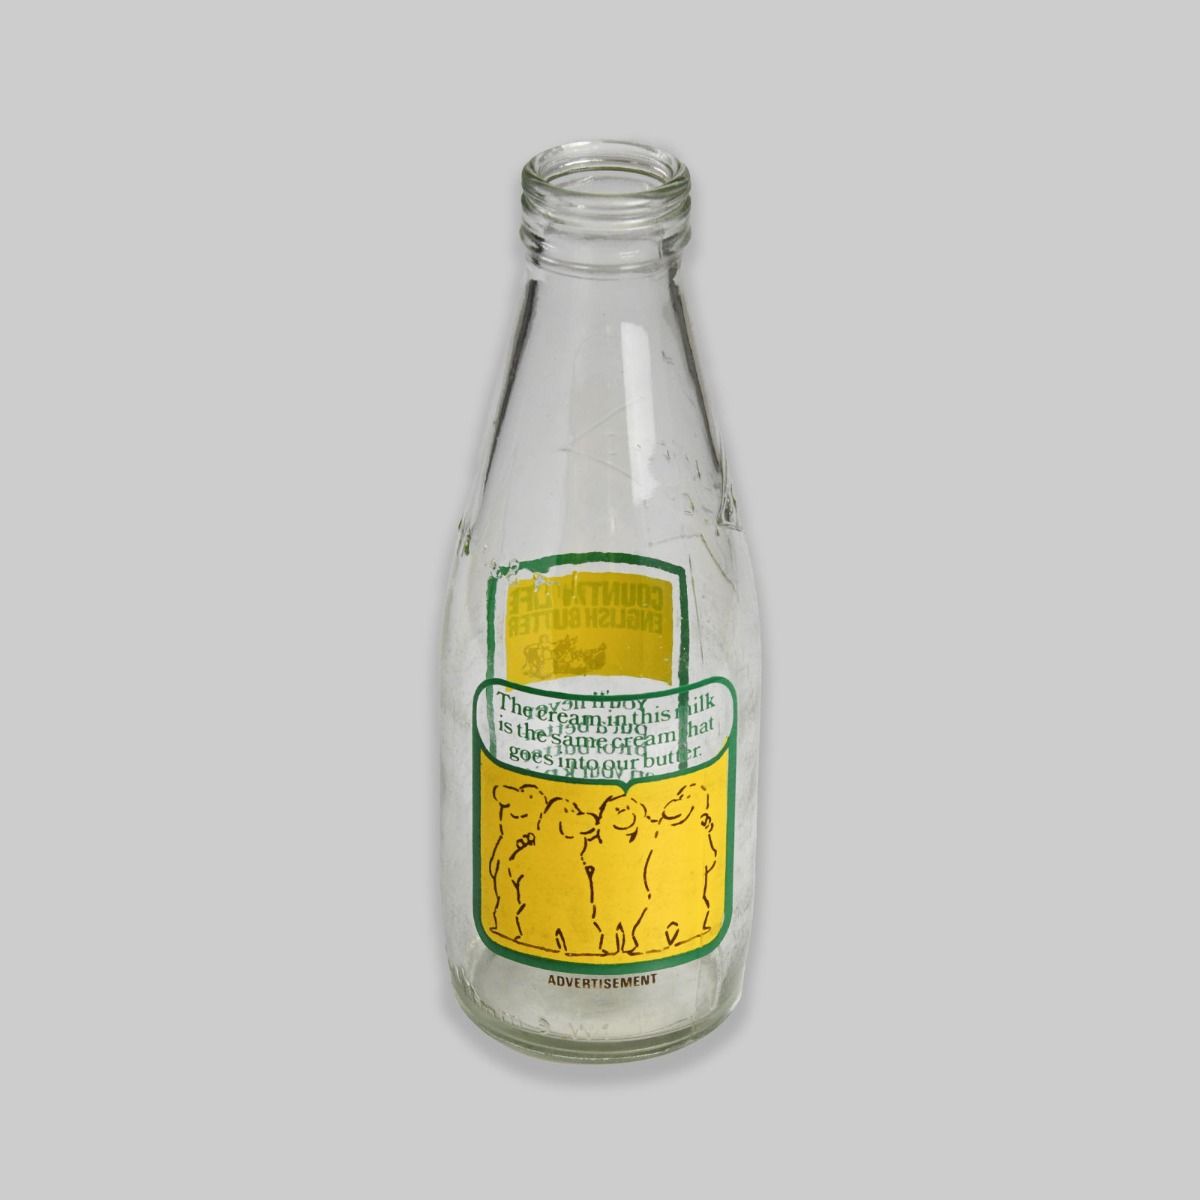 Vintage Advertising Milk Bottle Country Life English Butter